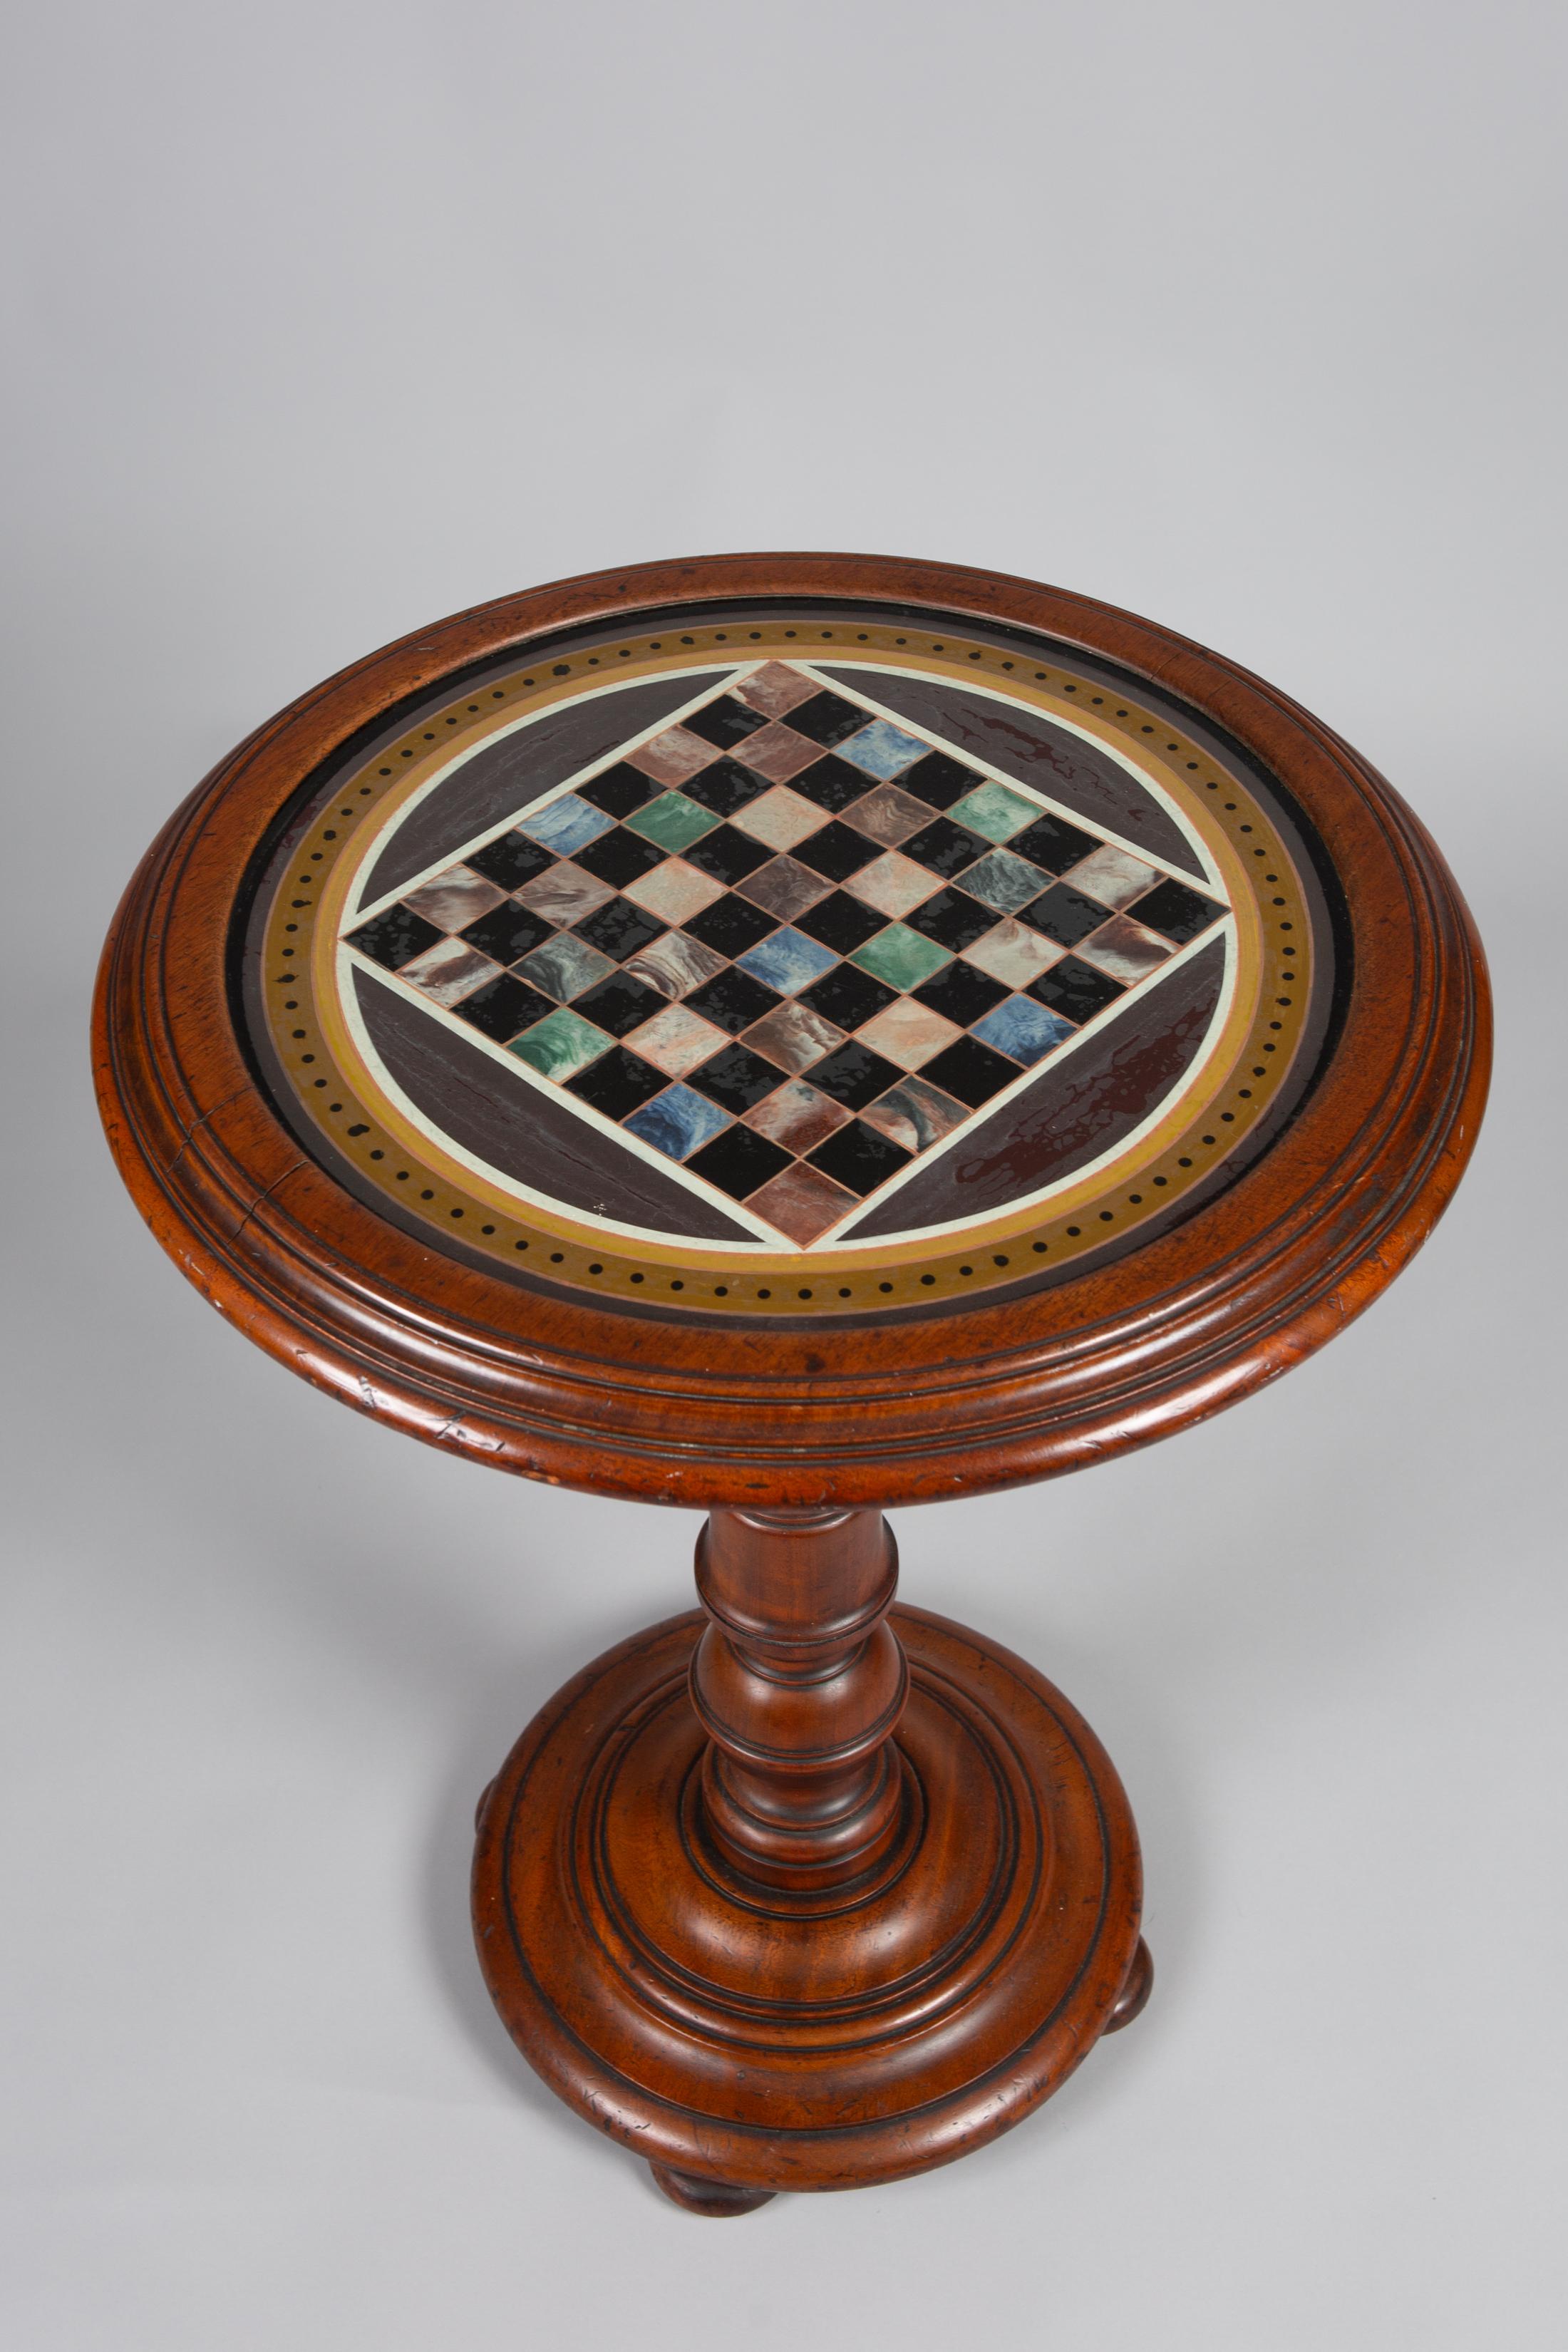 English walnut games table, pedestal style small table with games board underneath a glass top.